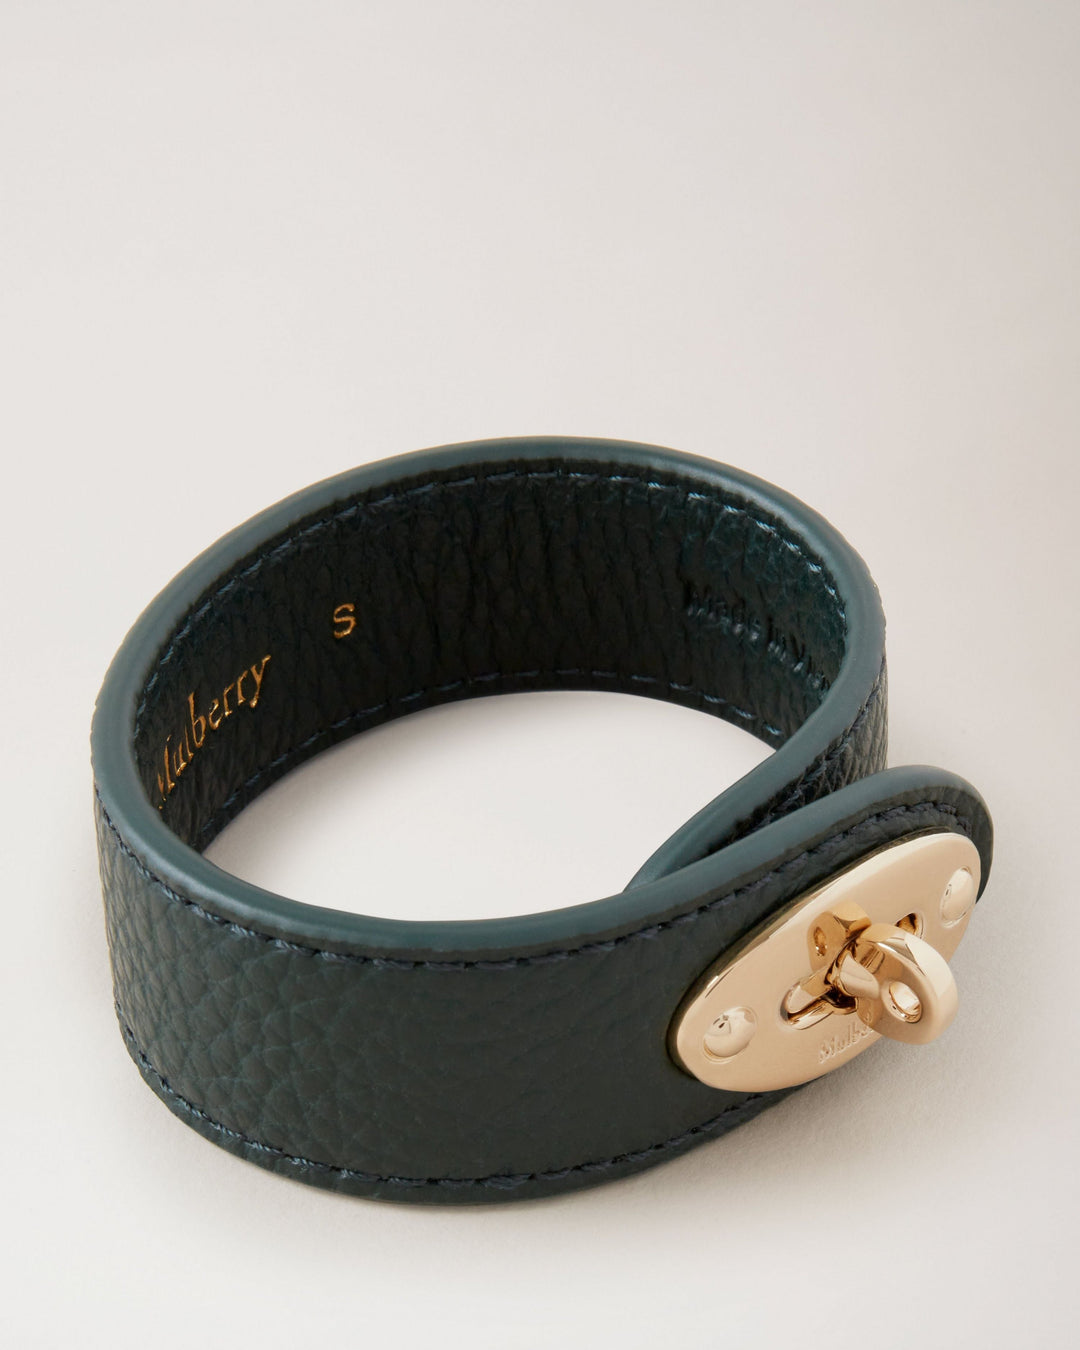 Bayswater Leather Bracelet Mulberry Green Small Classic Grain